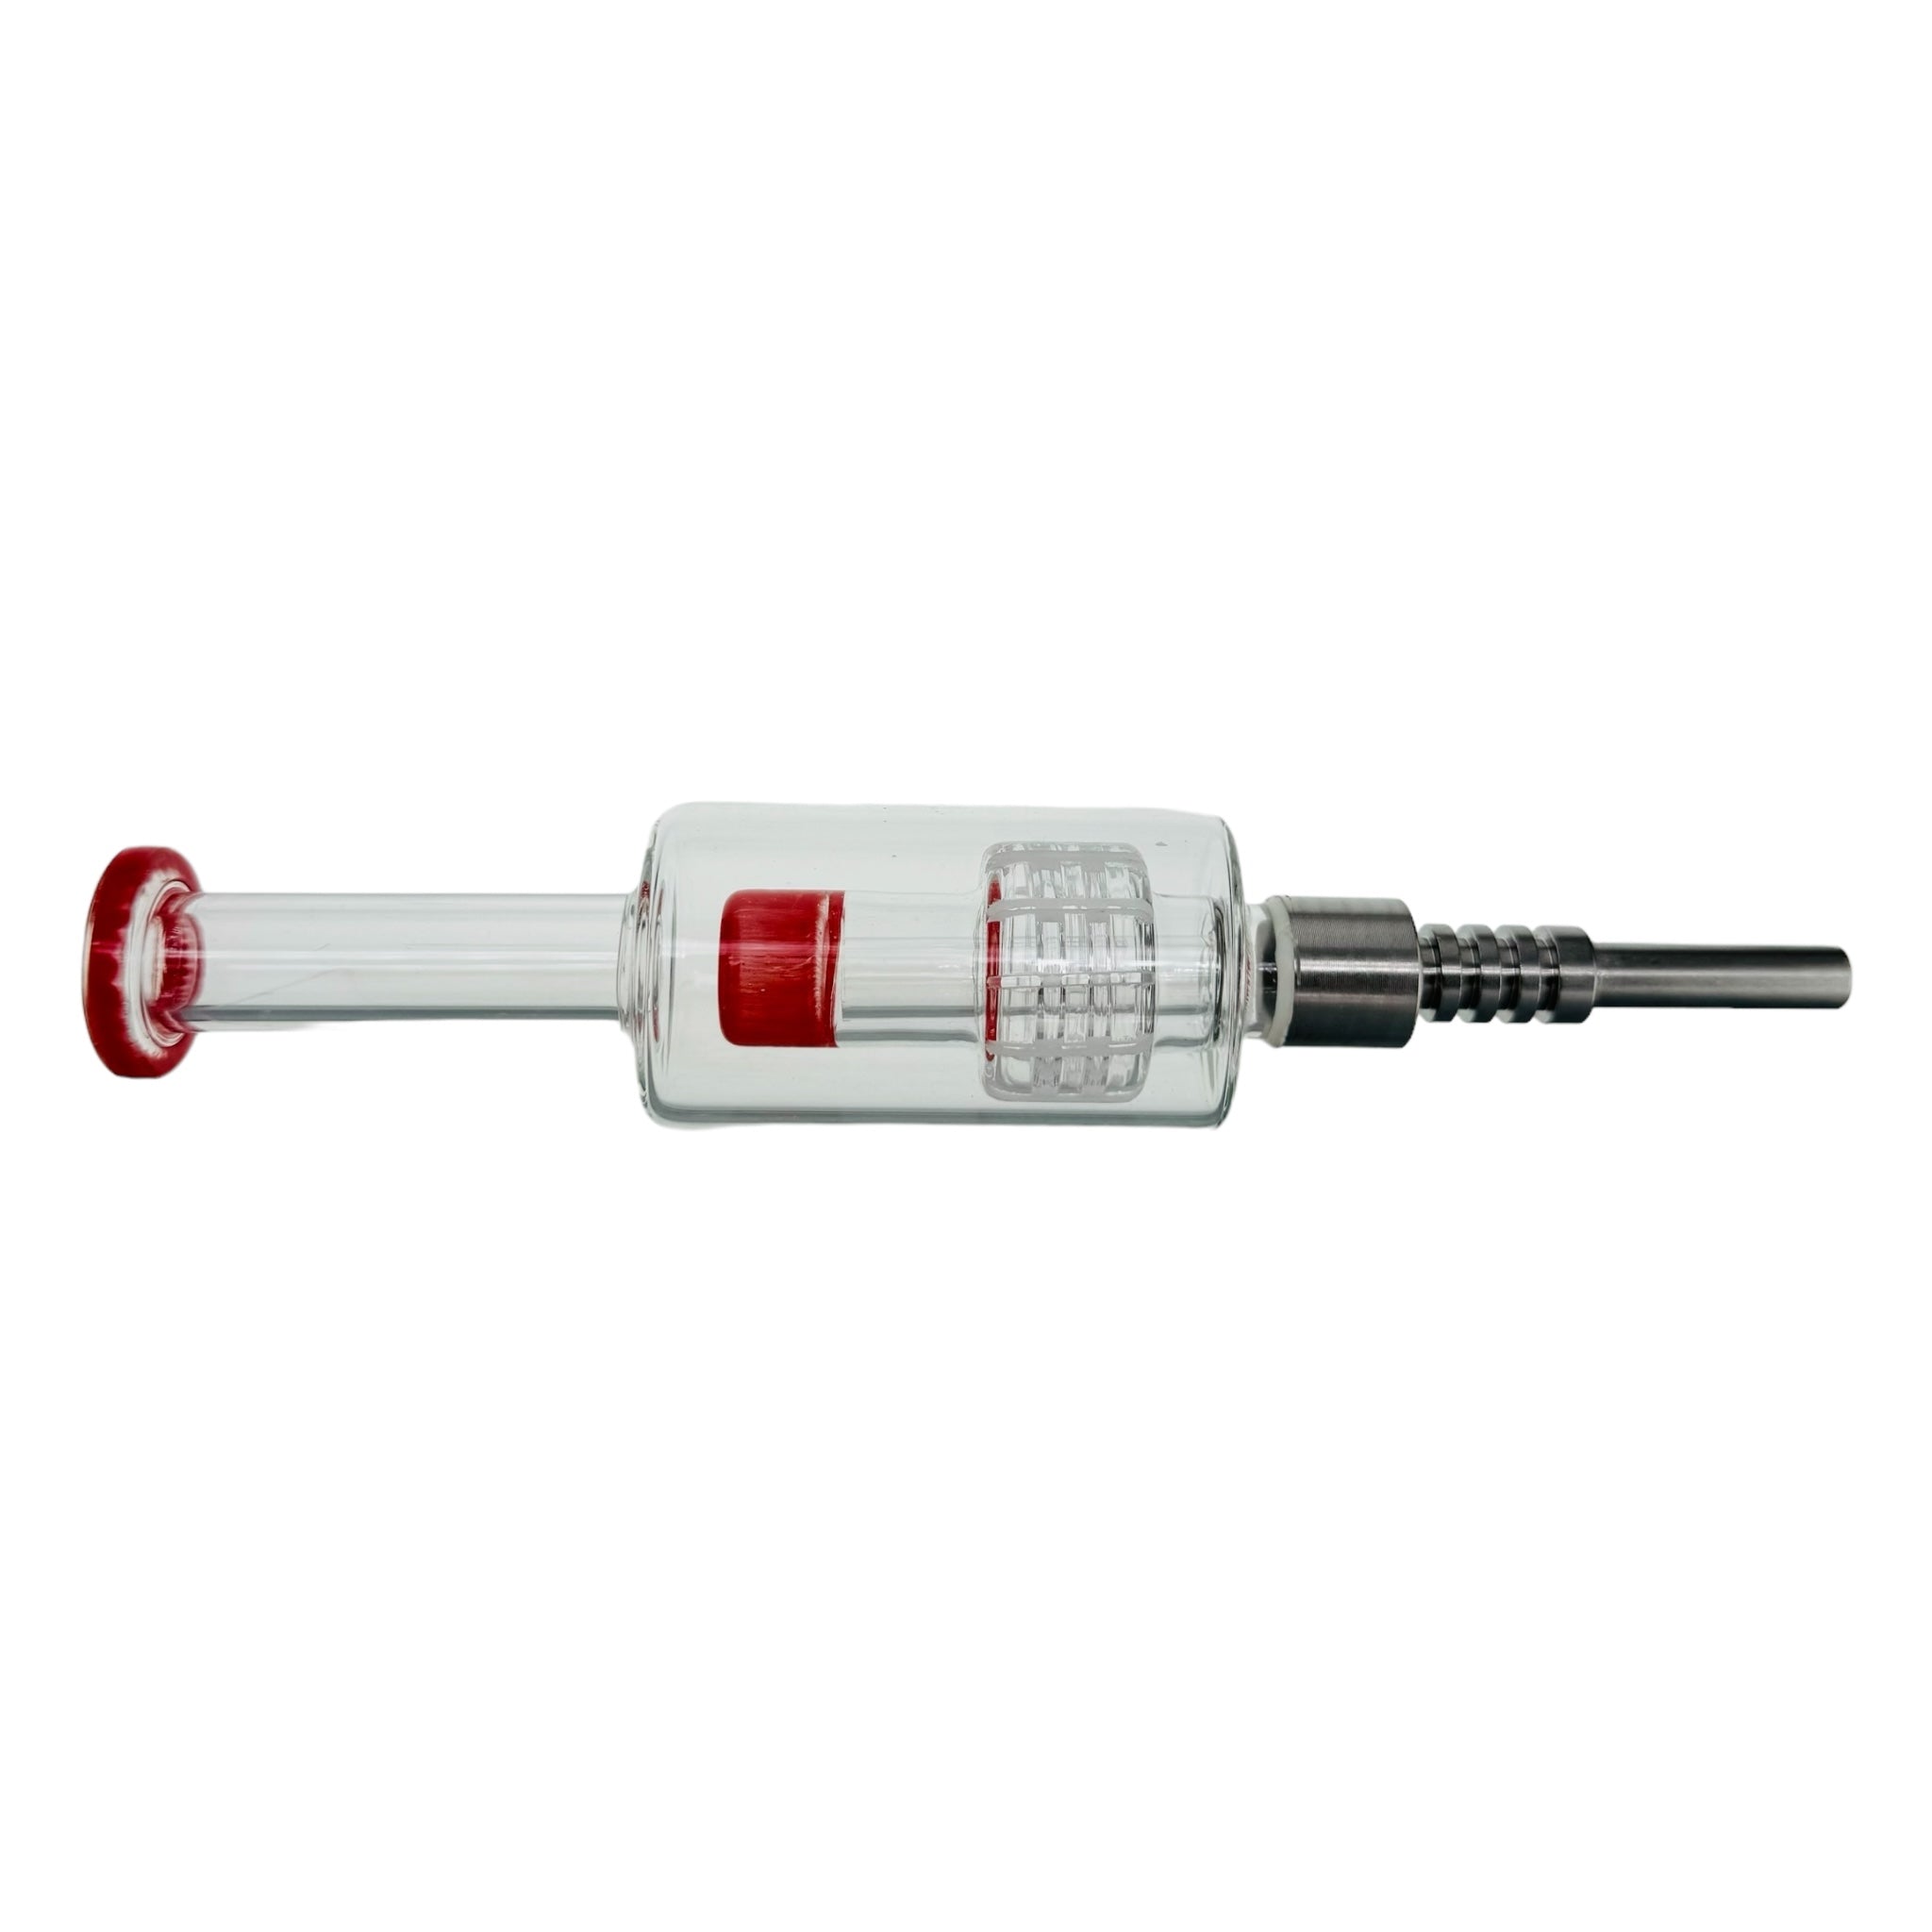 Red Nectar Collector With Slit Disc Perc And Threaded Metal Tip